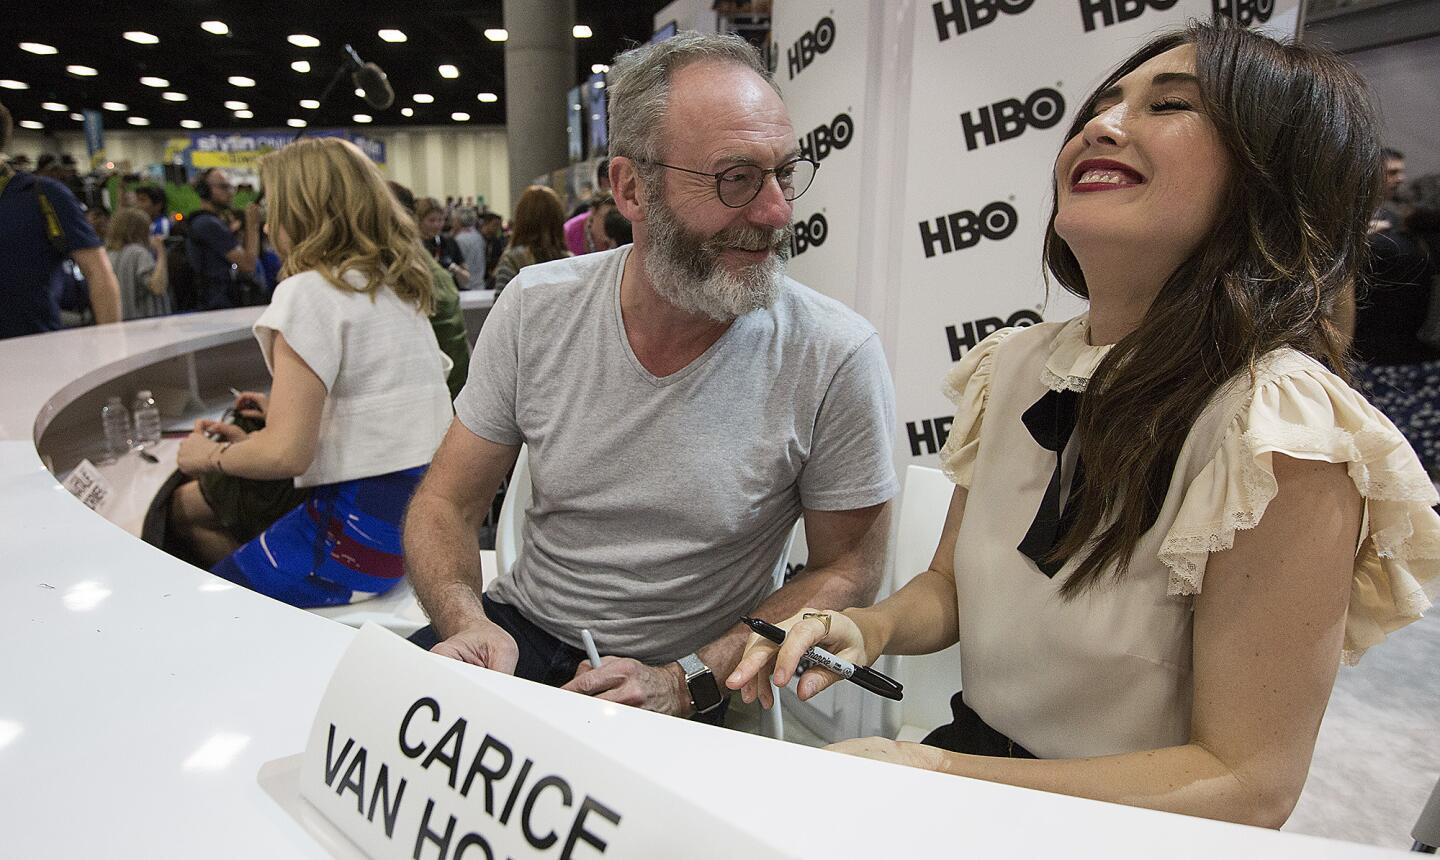 Meet and greet time for 'Game of Thrones' cast